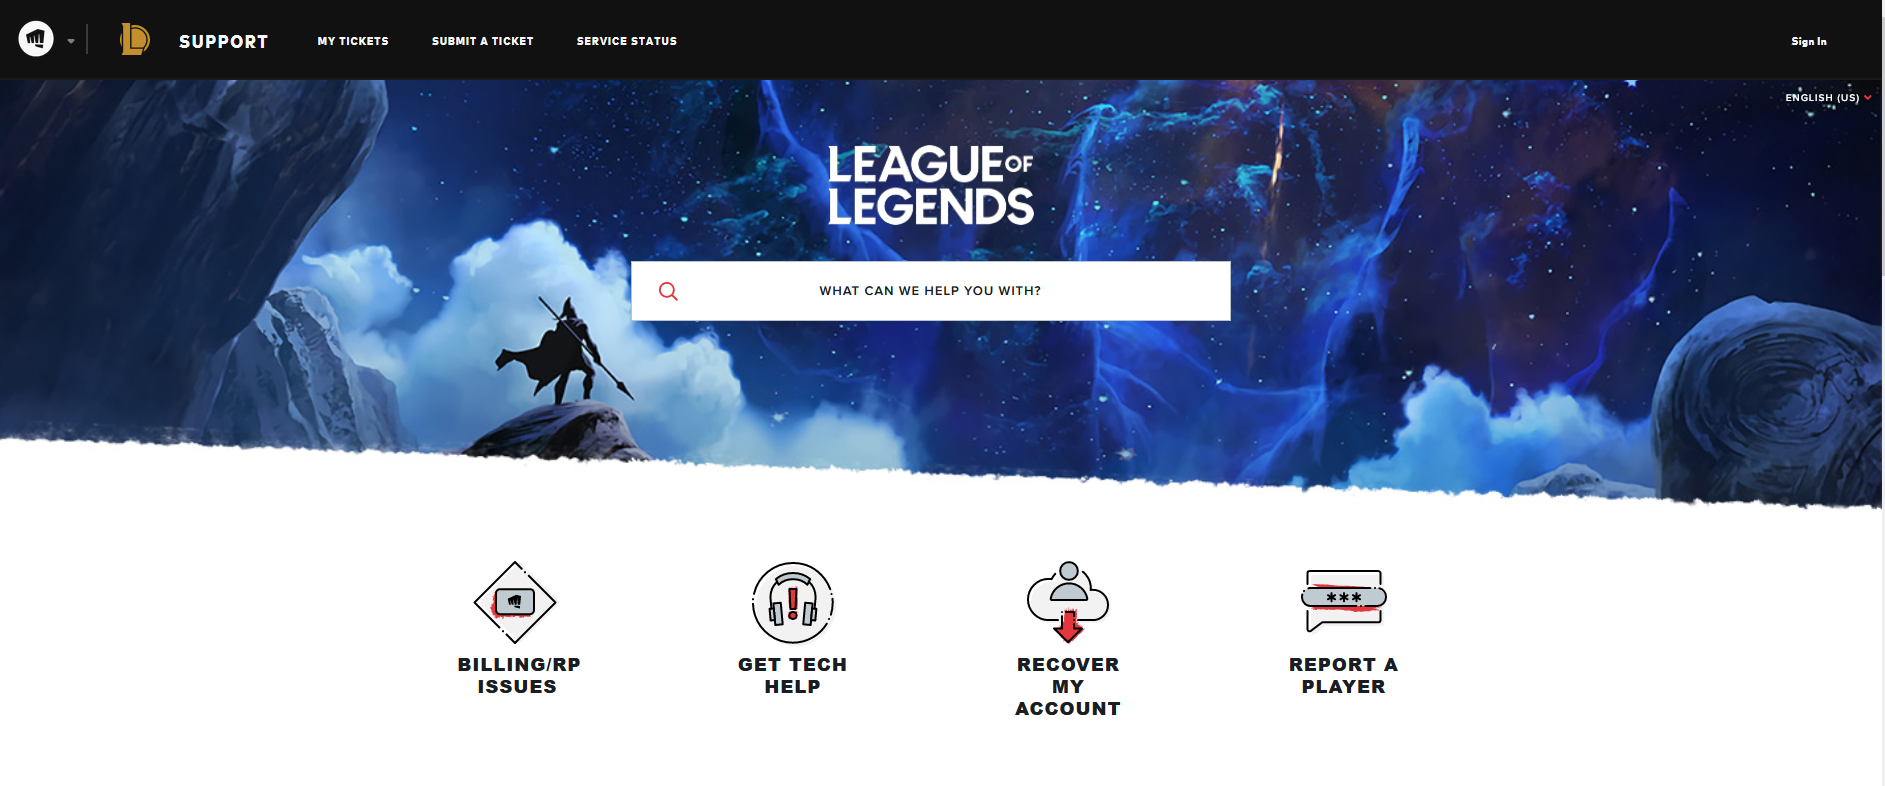 Check age of your Lol account on the support website